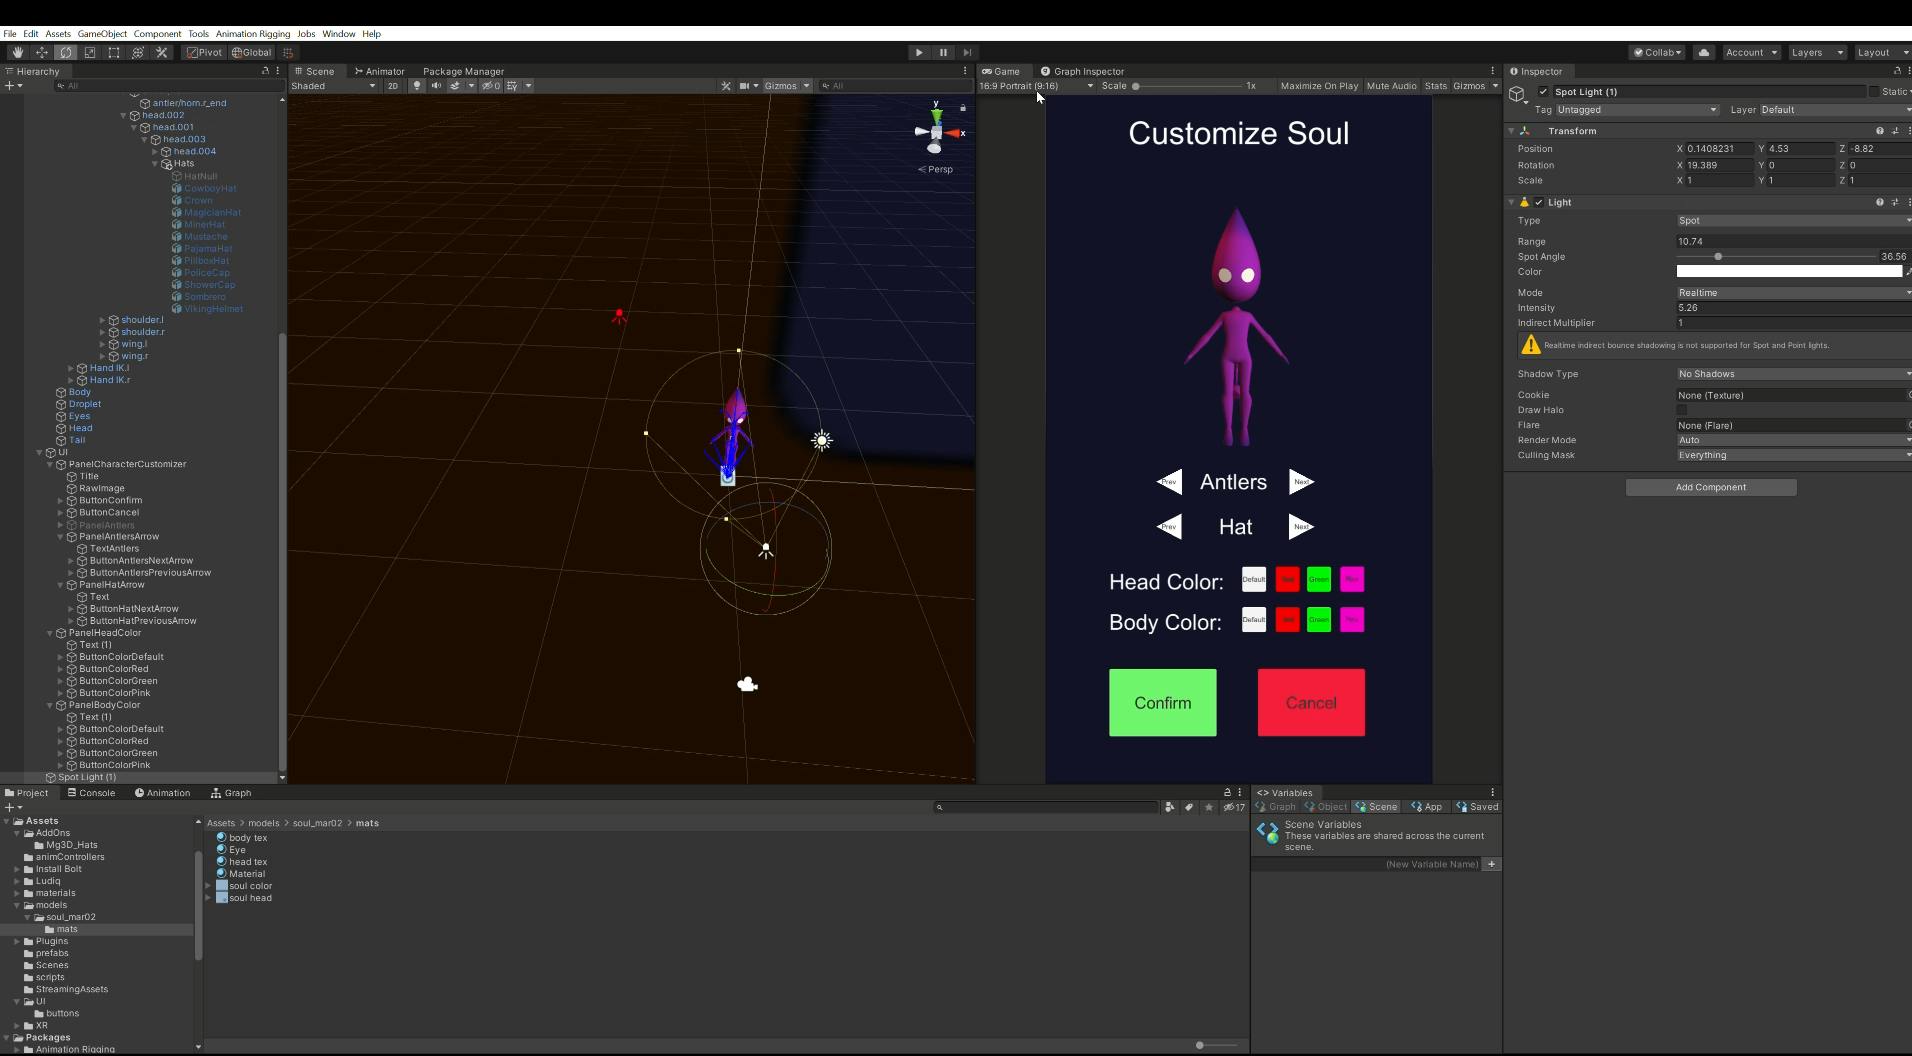 screenshot of a workspace in the Unity game engine, showing a little Soul being customized